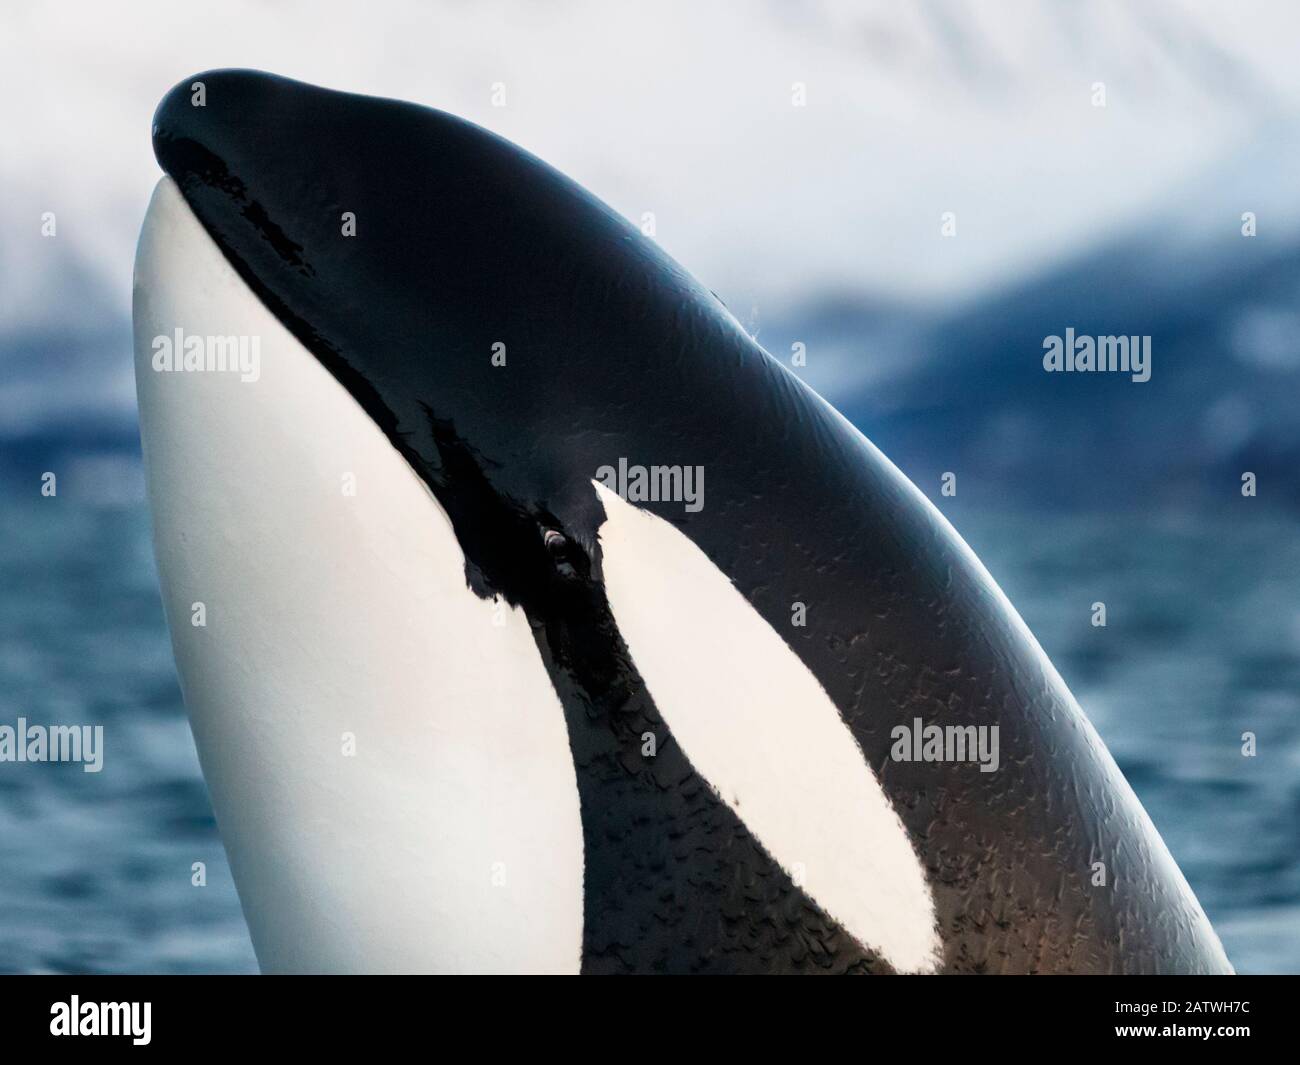 Killer whale / orca (Orcinus orca). Spyhopping very close, showing eye. Kvanangen, Troms, Norway. November Stock Photo